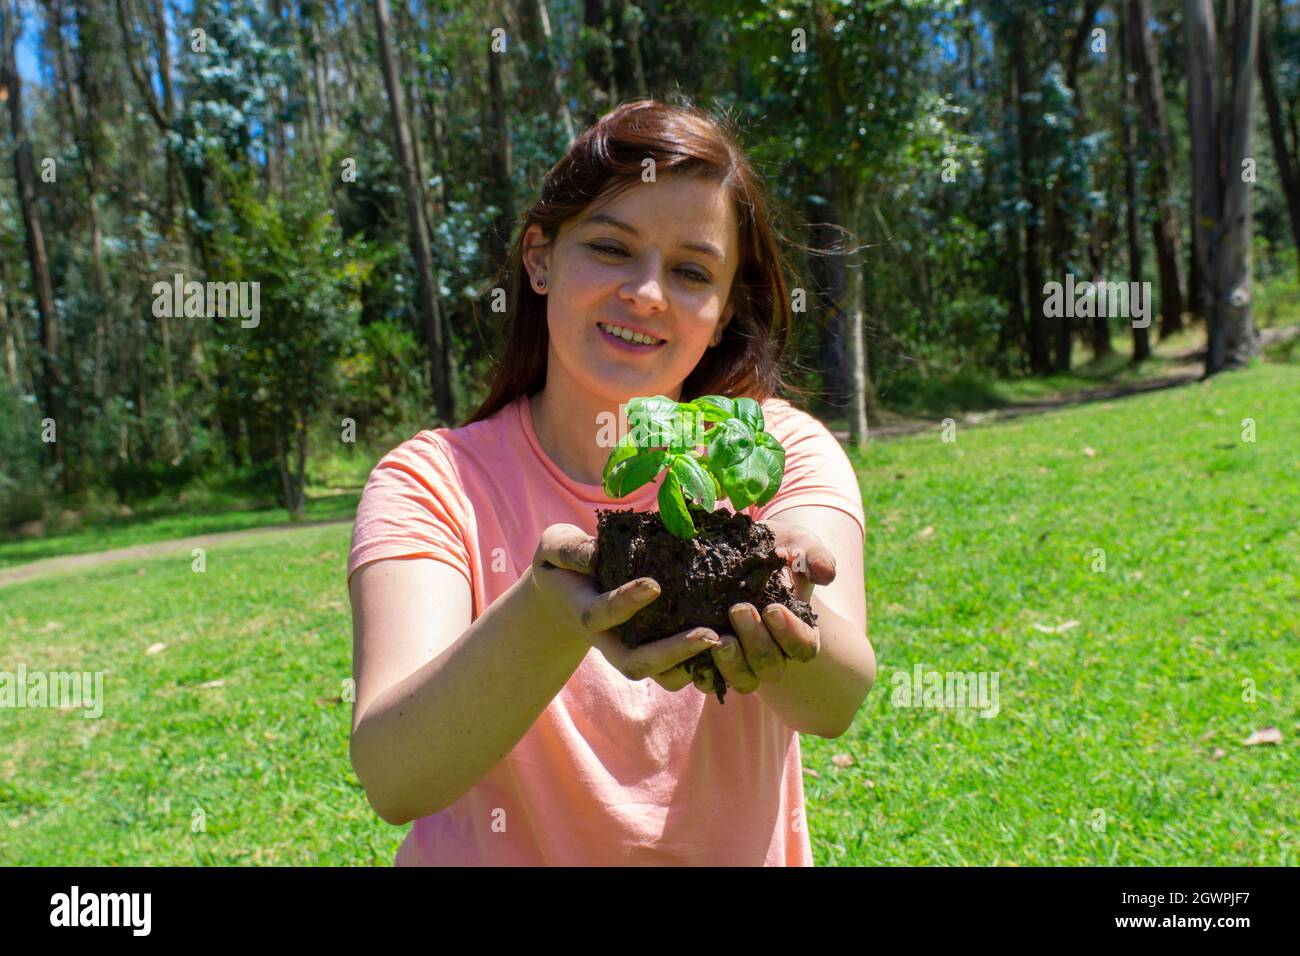 Beautiful young Hispanic woman holding a small plant in her field hands before being planted in a green field surrounded by trees during the morning Stock Photo